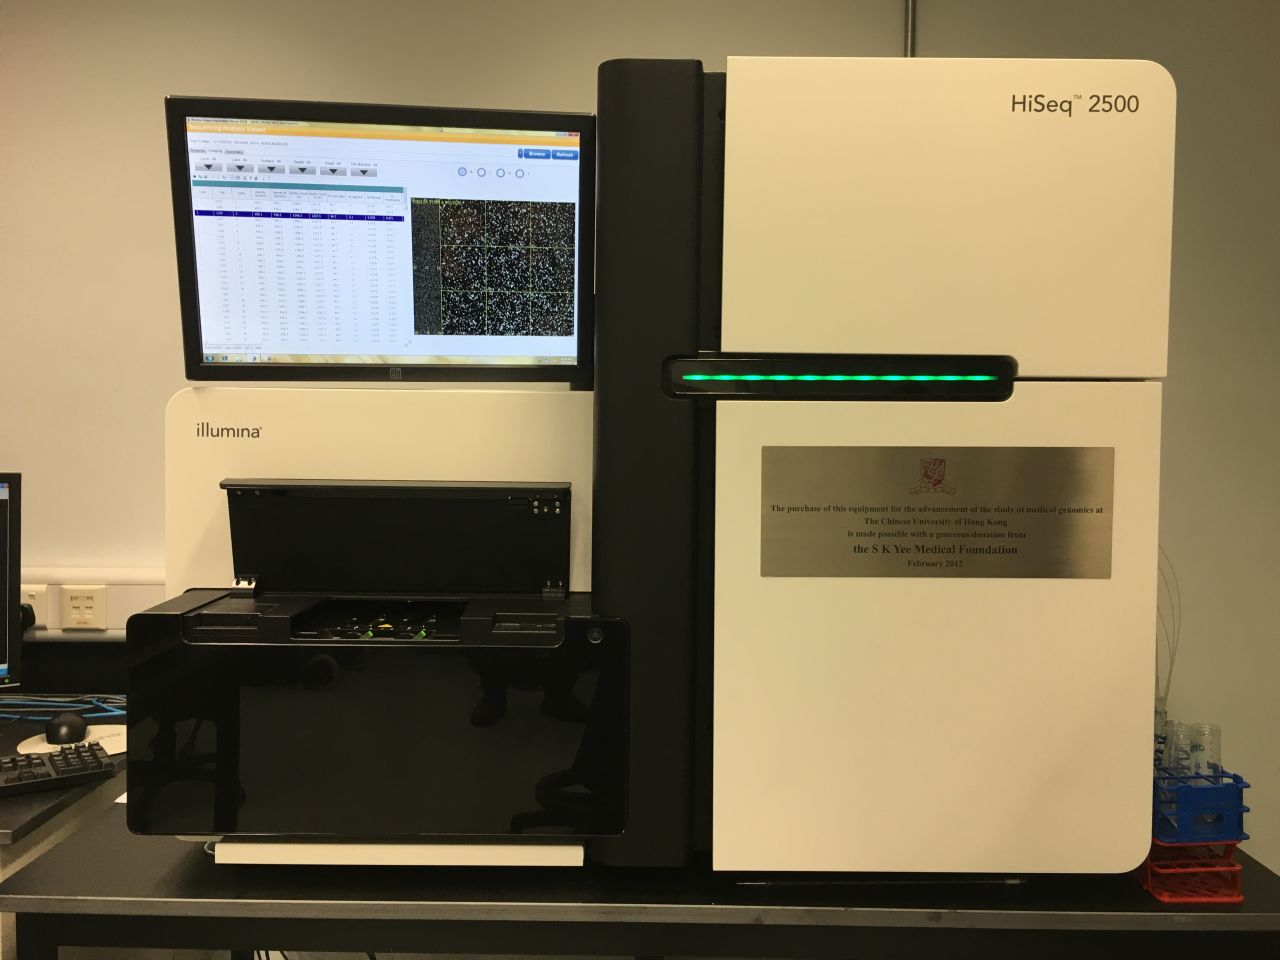 The Use of PCR was once expensive, but the invention of next generation sequencers -- such as this one at the Prince of Wales Hospital, in Hong Kong -- have made prenatal blood tests much faster and more affordable. A spectrum of diseases could now be tested for, including cancer.